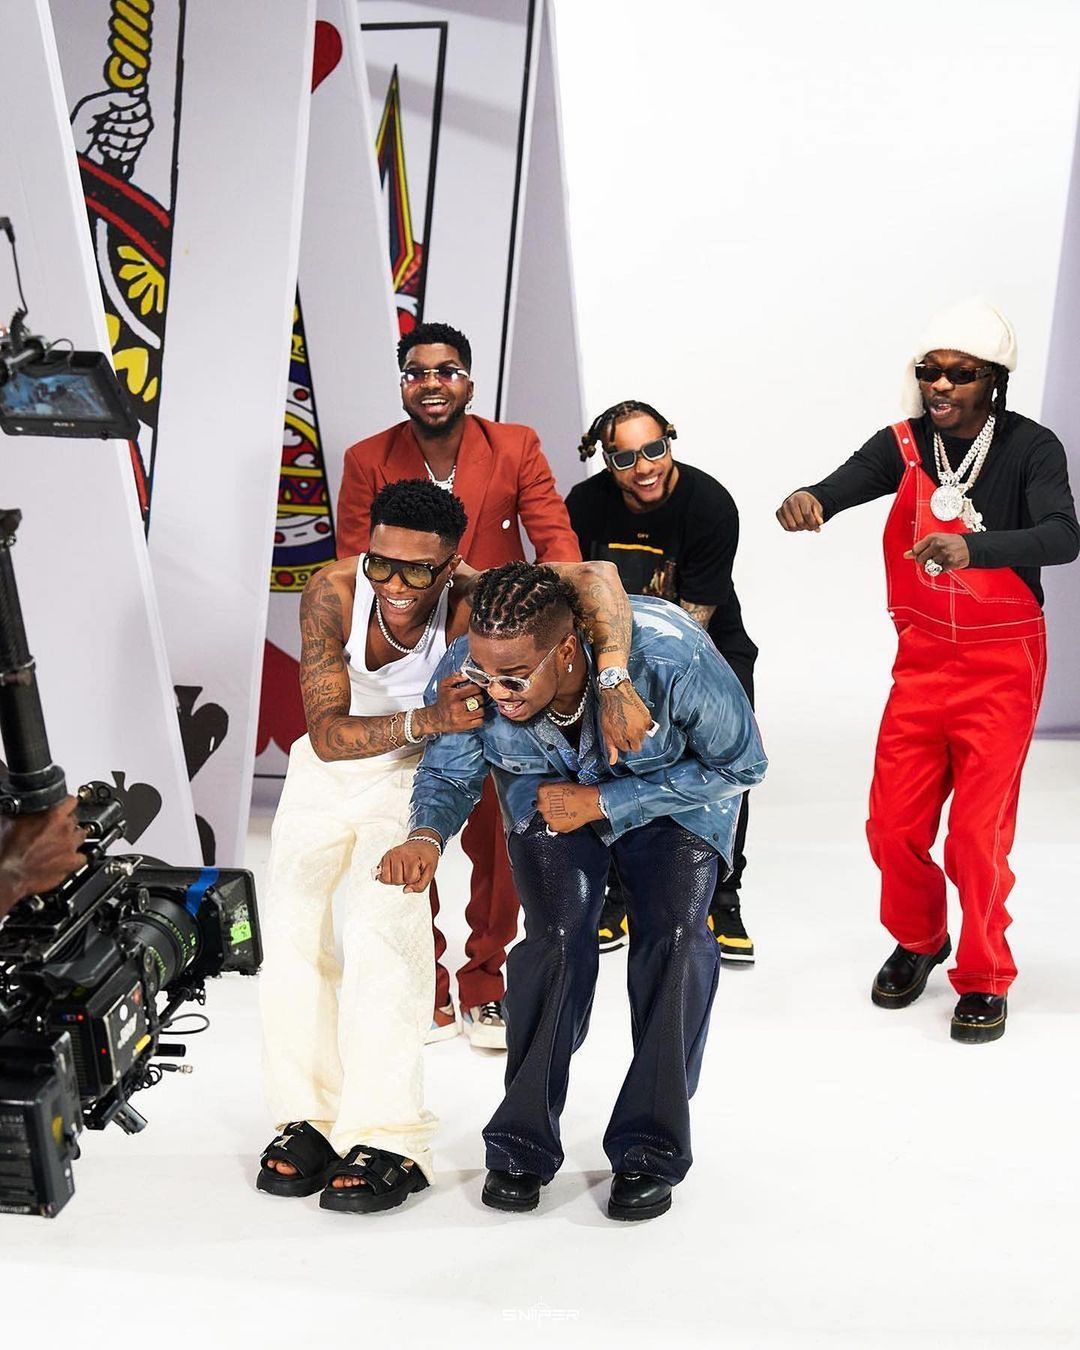 DIRECTOR PINK DIRECTS VISUALS FOR ABACADABRA REMIX FEATURING WIZKID